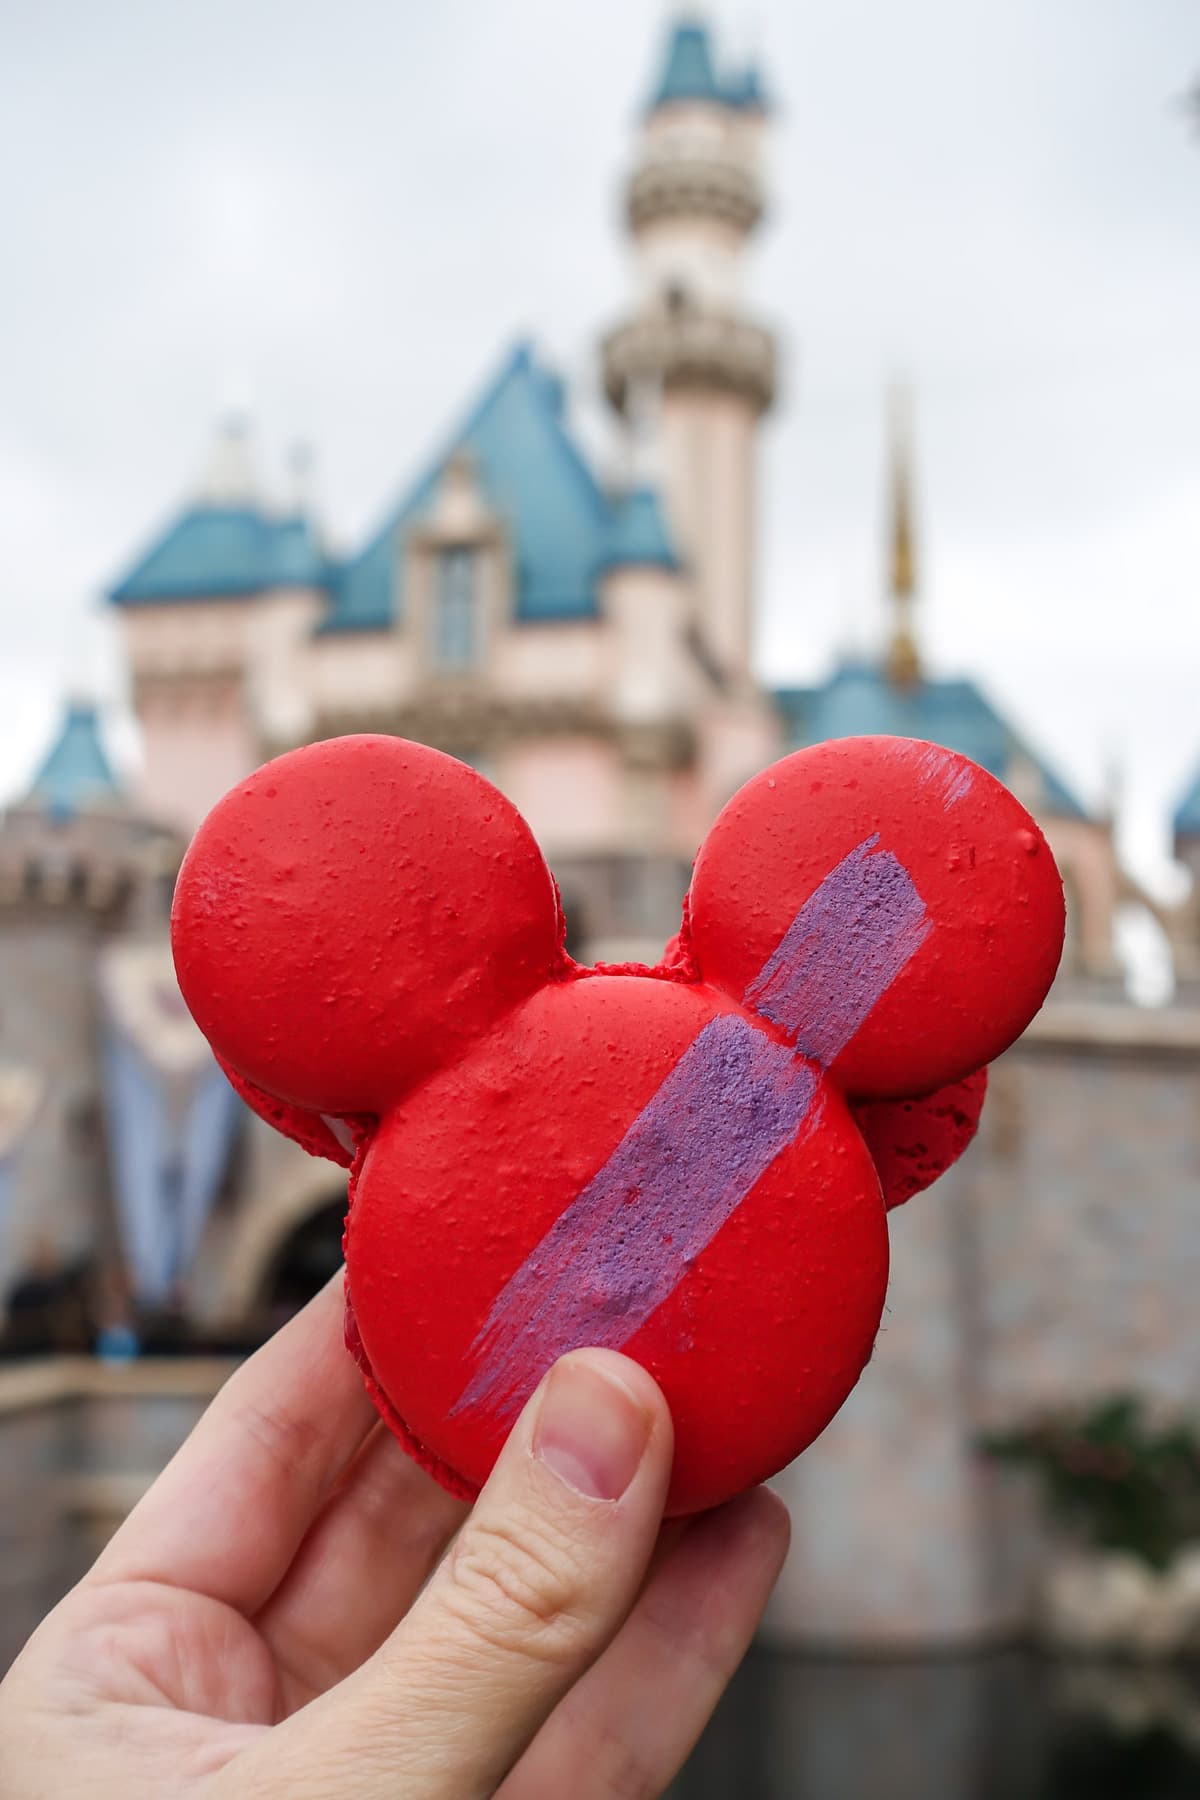 Mickey Macaron in front of castle